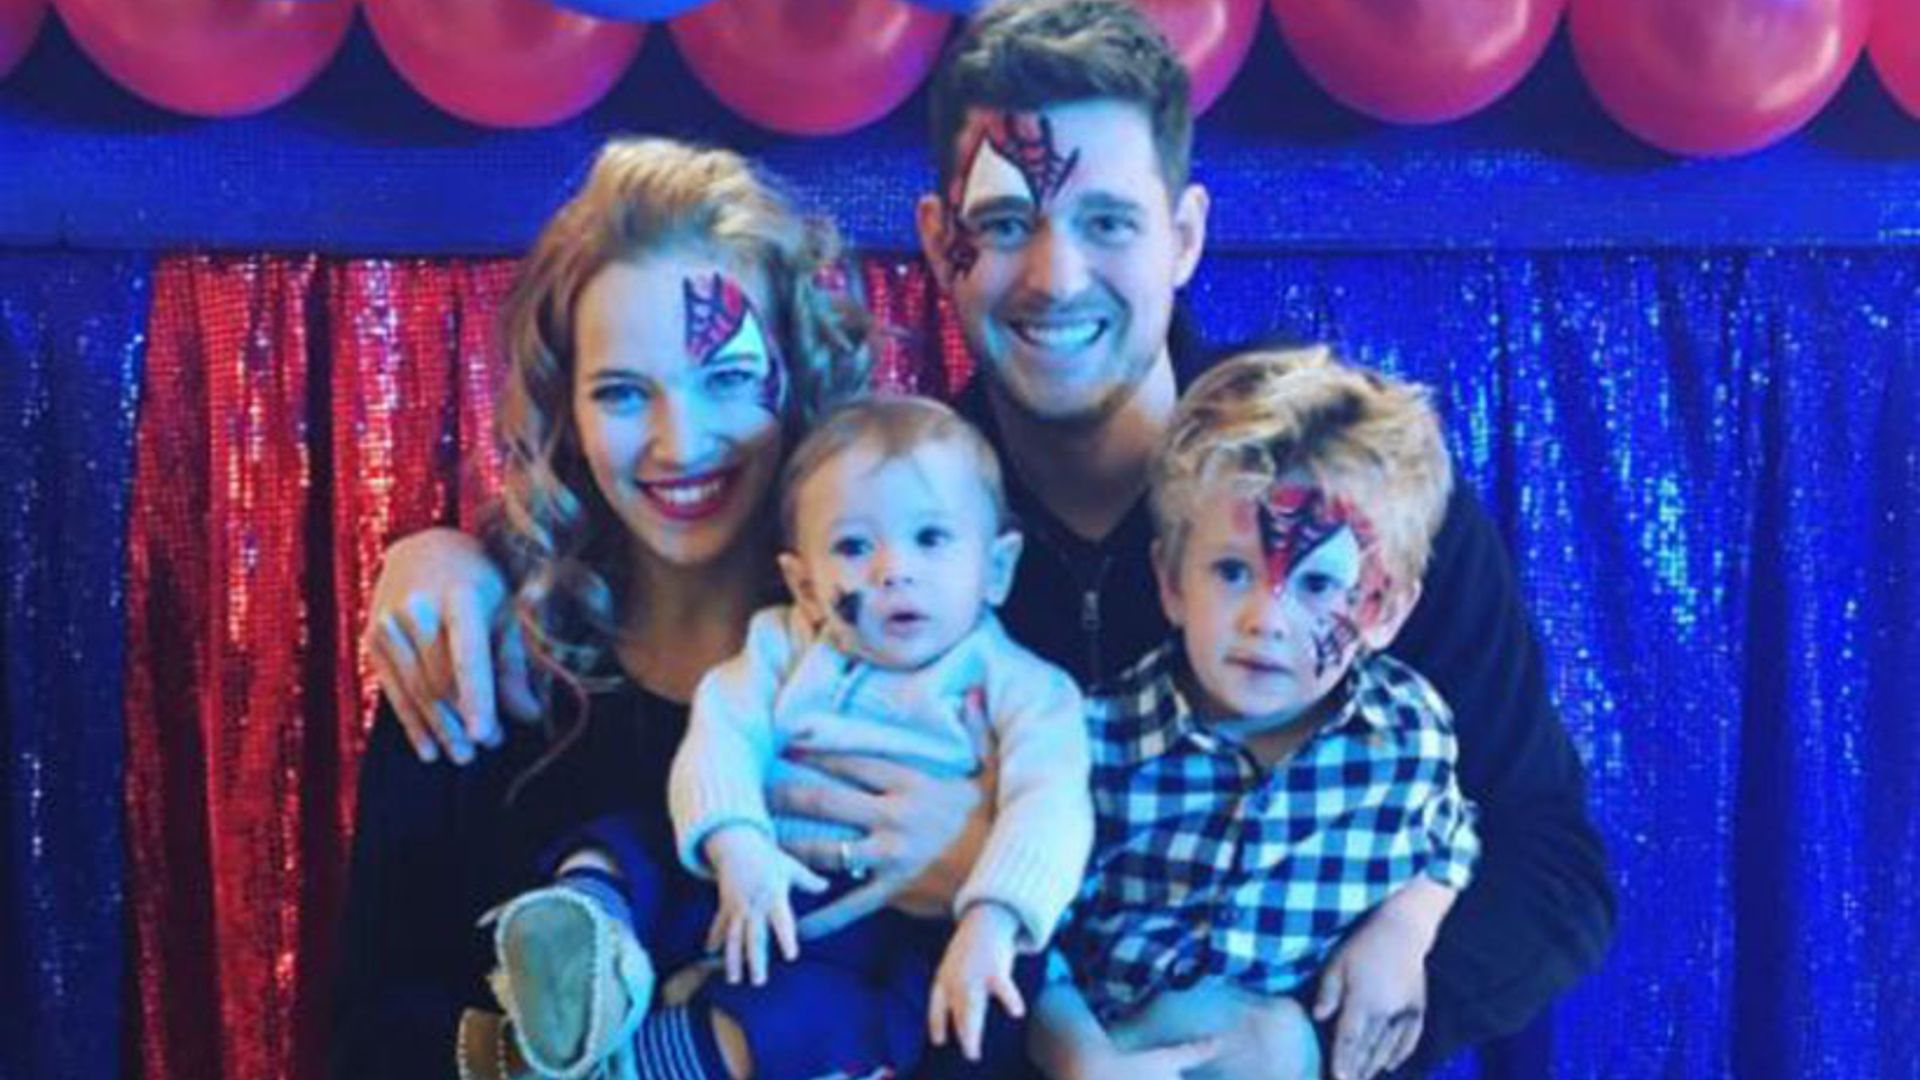 Michael Bublé's son Noah celebrates 4th birthday in style!